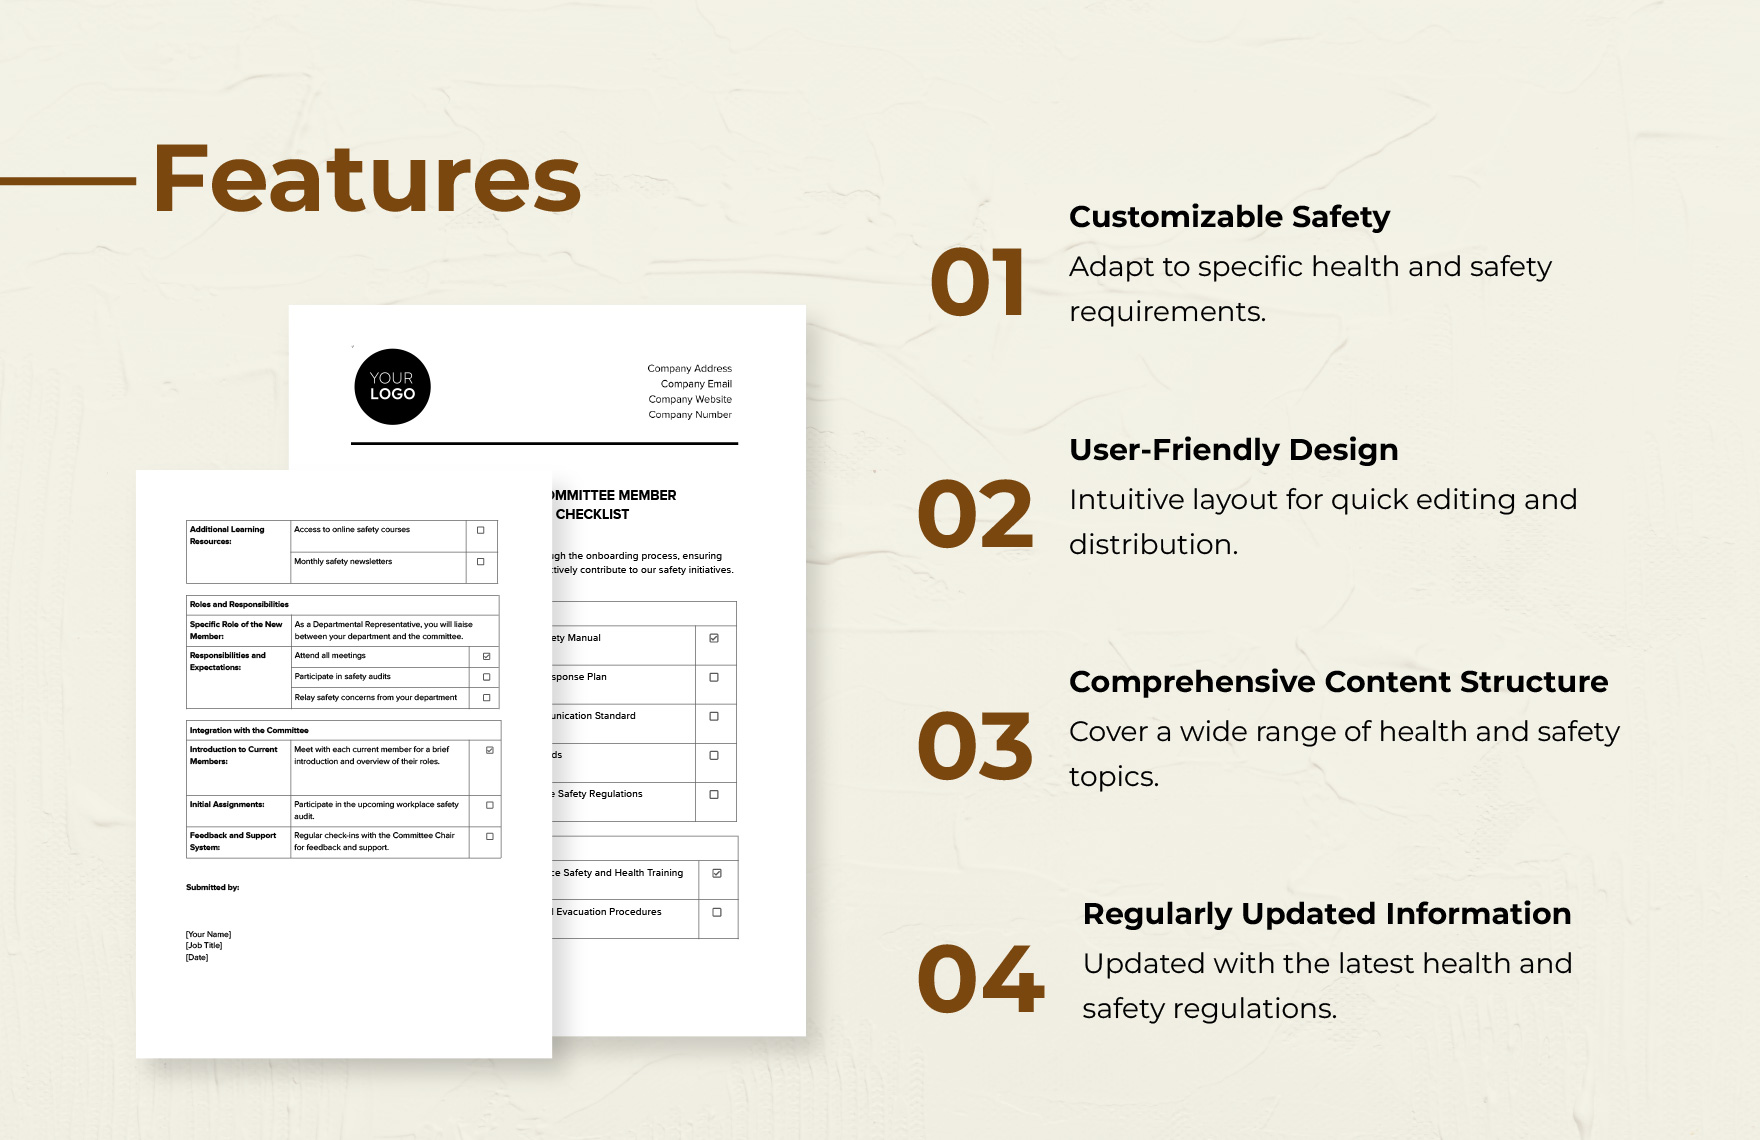 Health & Safety Committee Member Onboarding Checklist Template